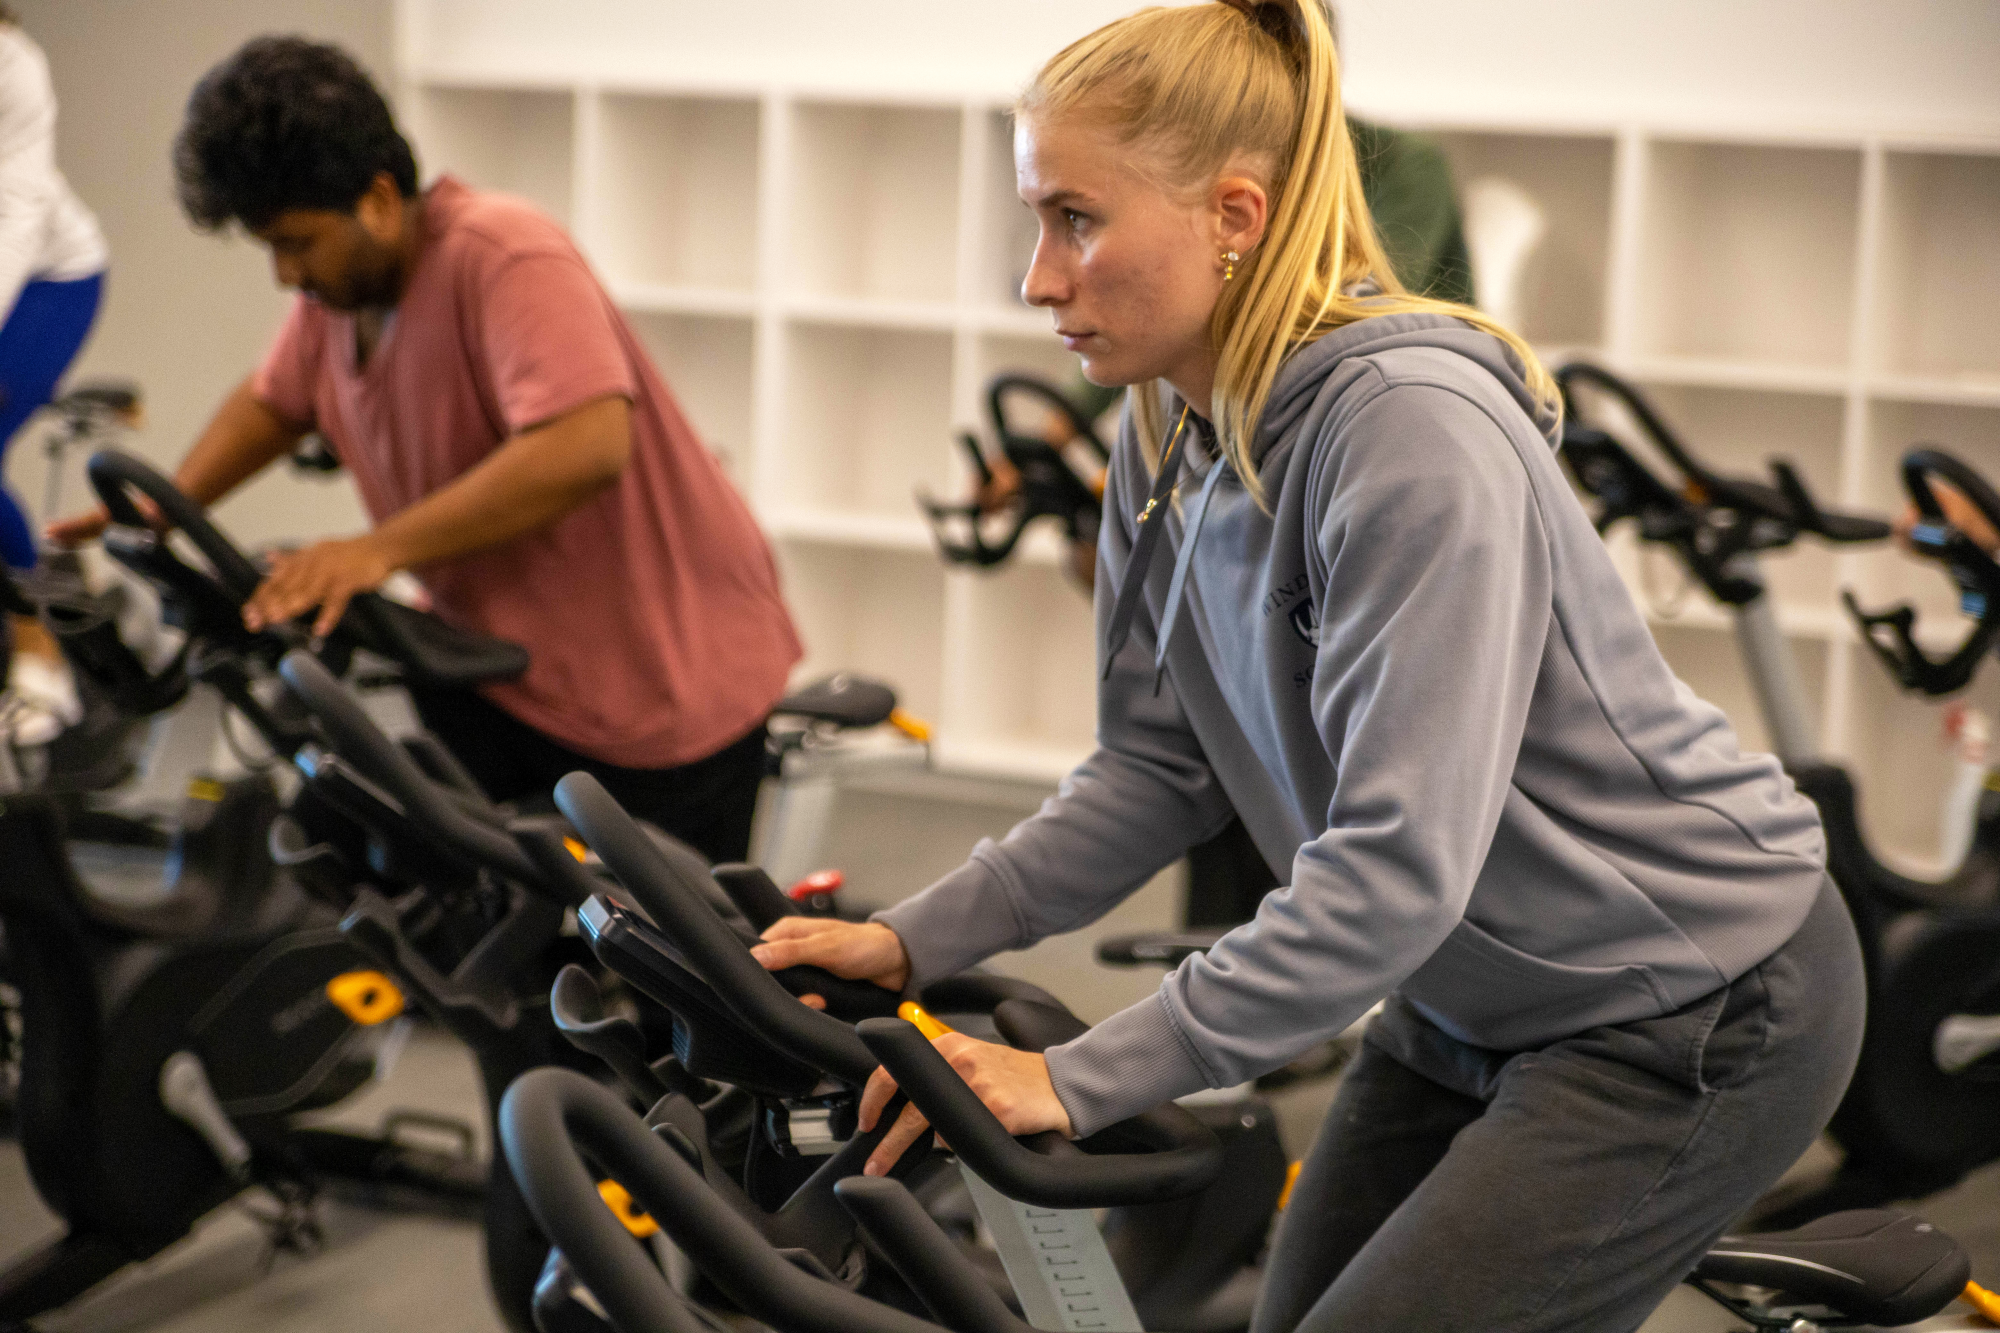 Student biking on stationary bike in a spin class.